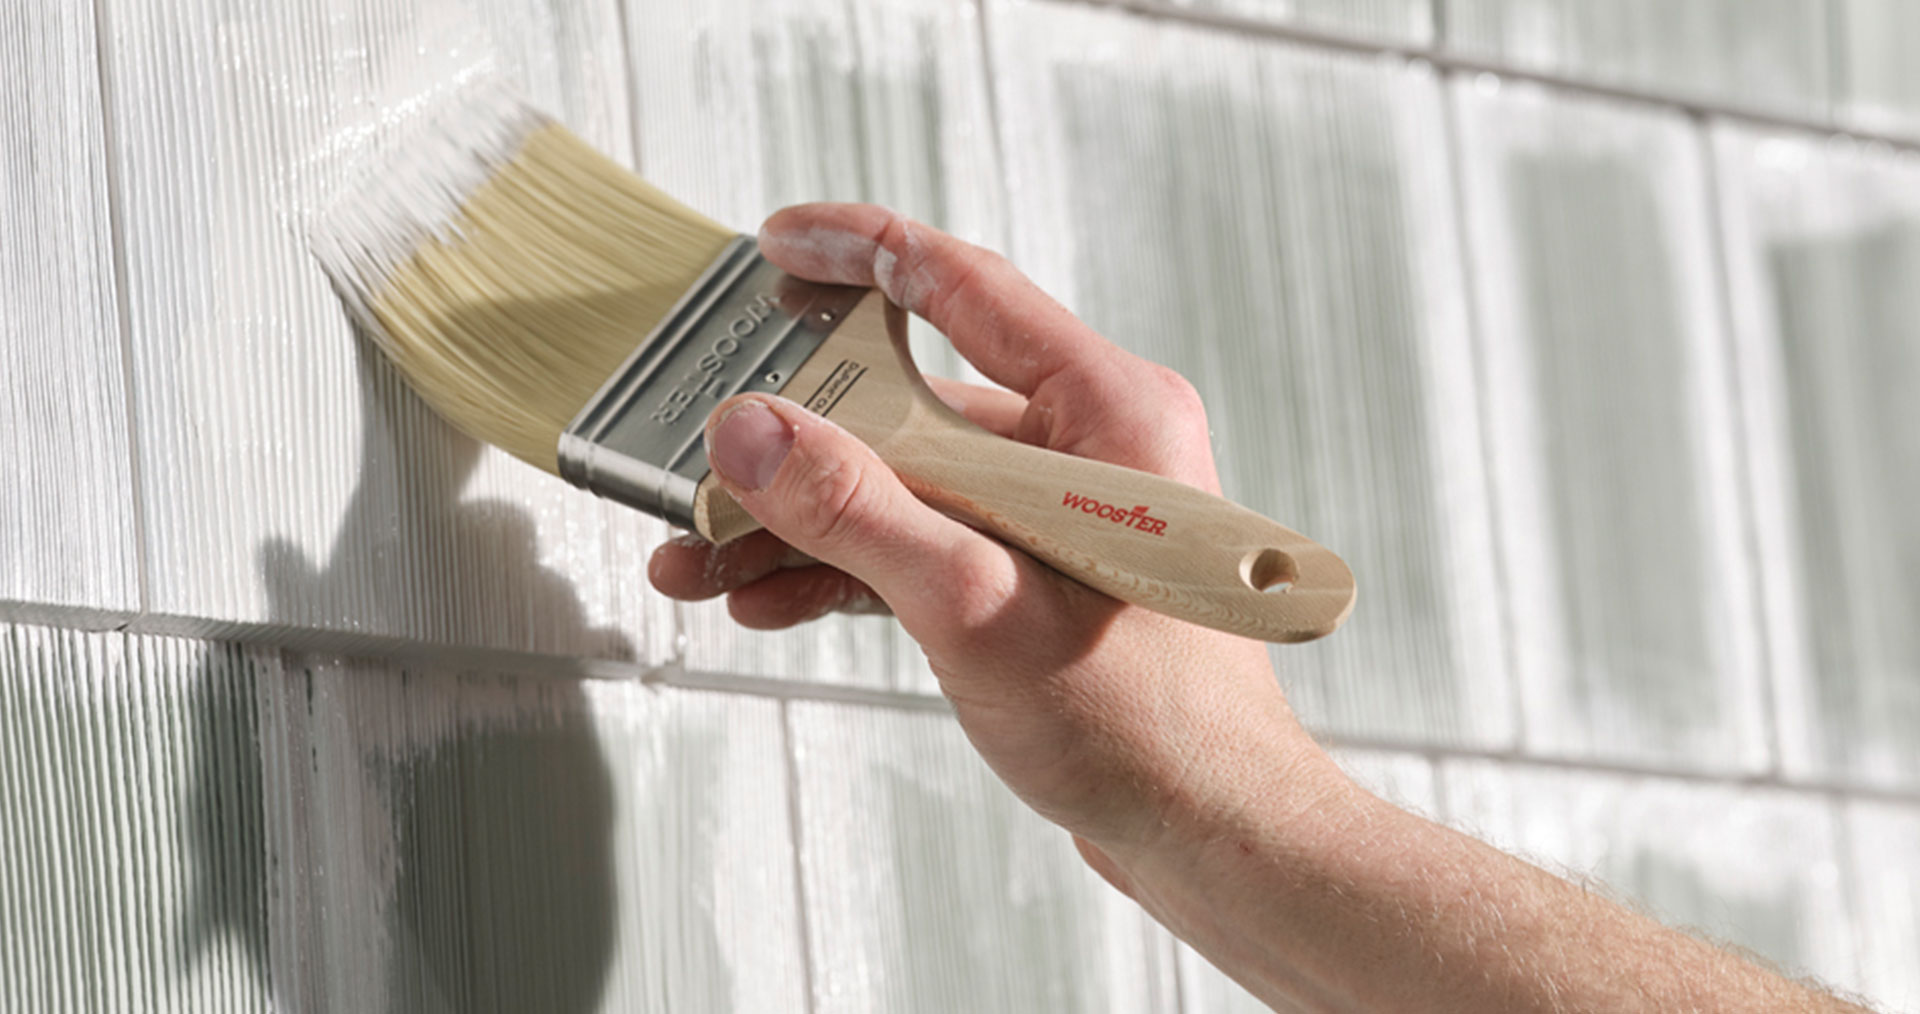 How To Match Paintbrush To Project - Wooster Brush